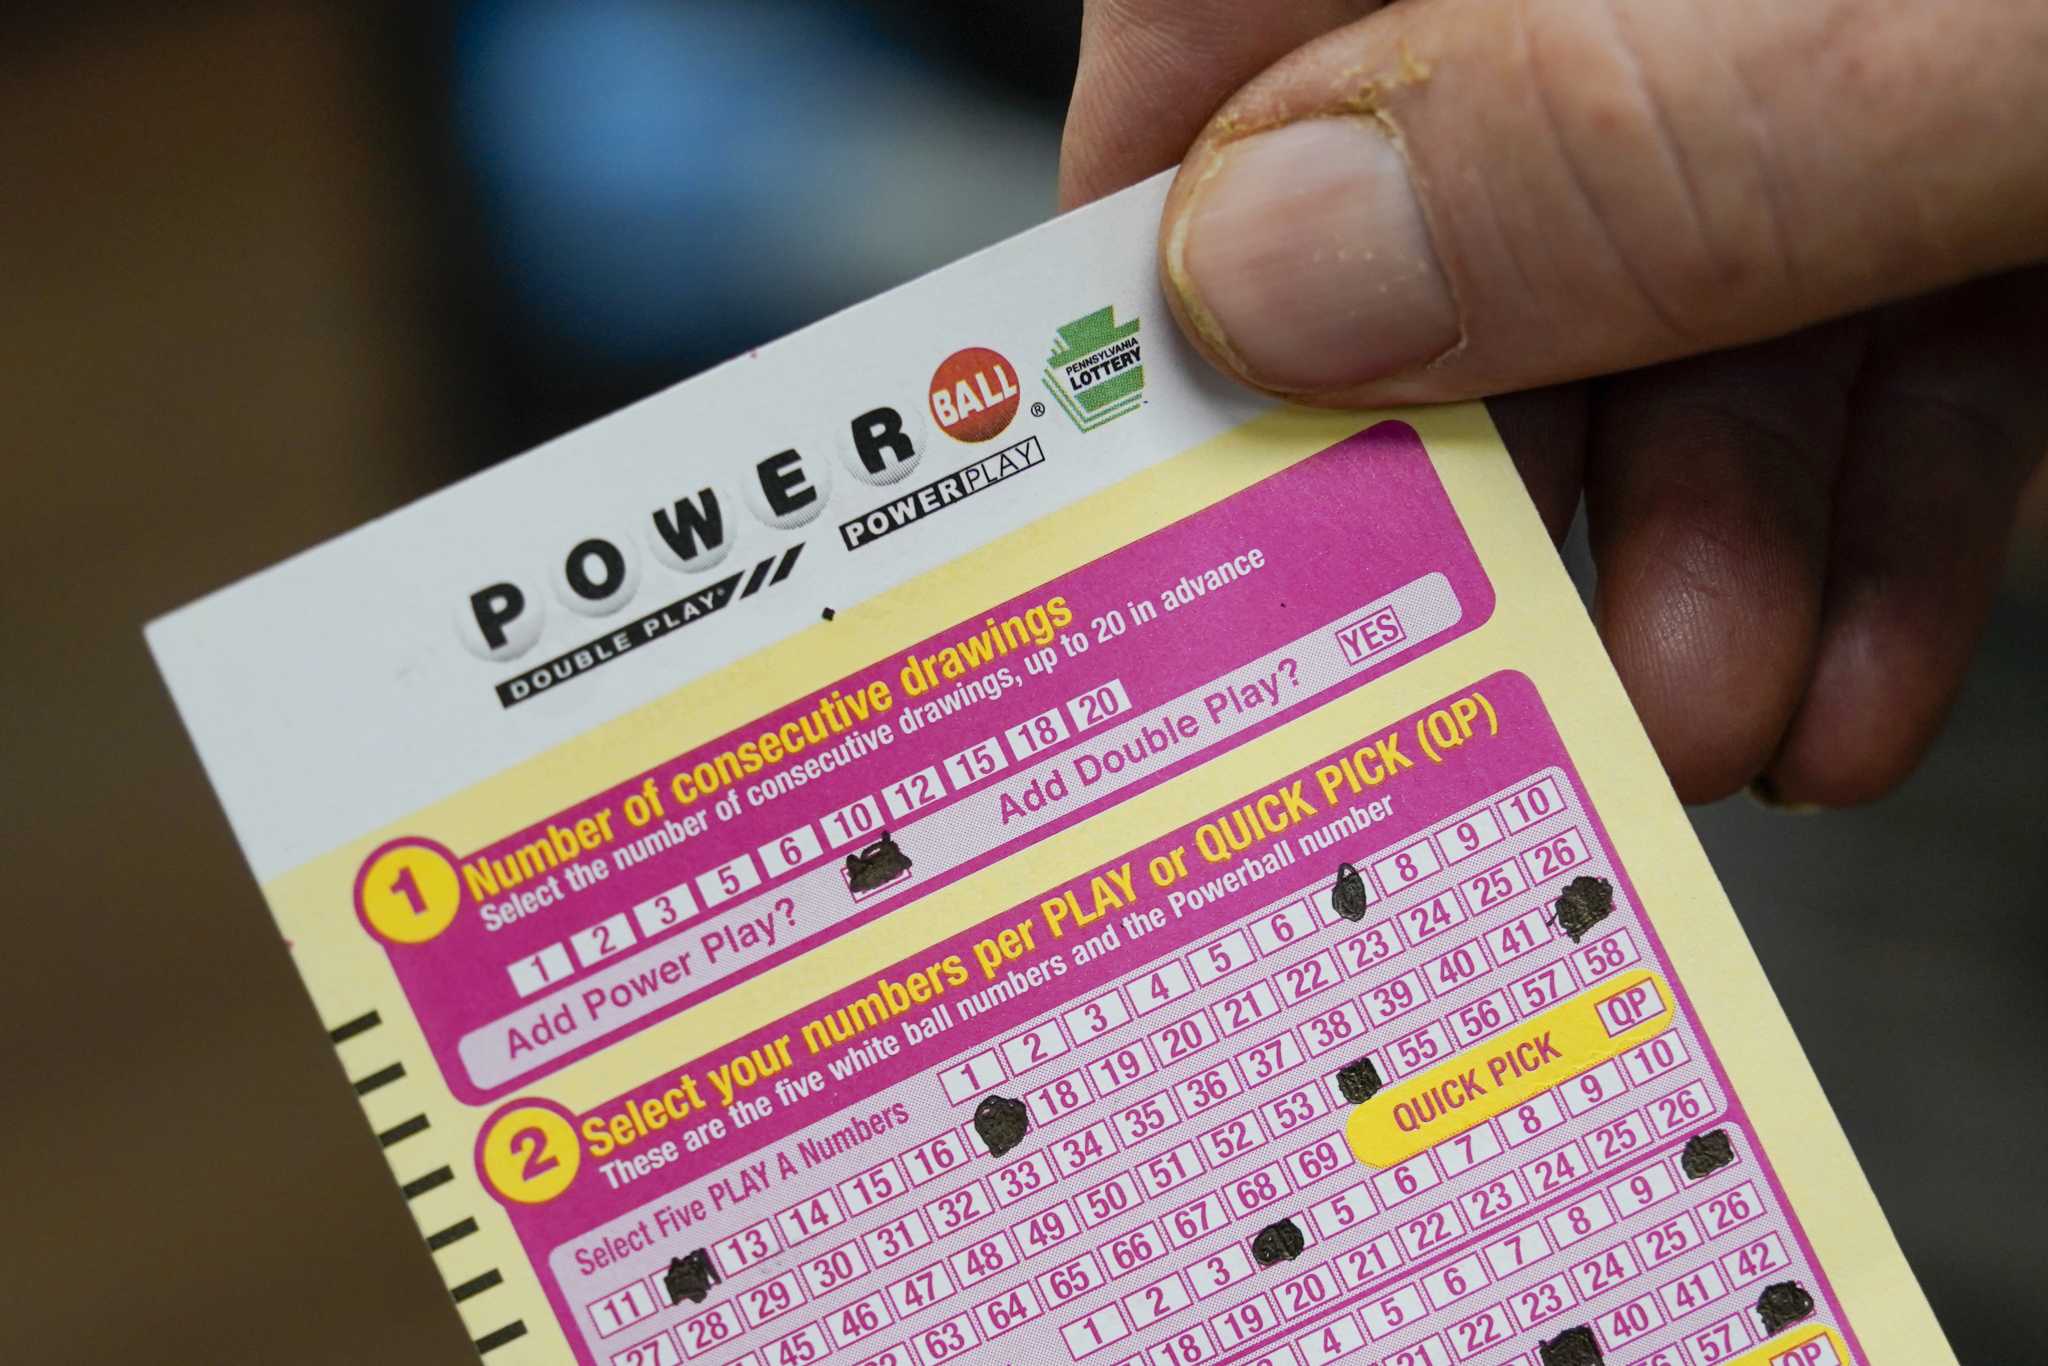 Winning Powerball ticket worth $100,000 sold in Connecticut